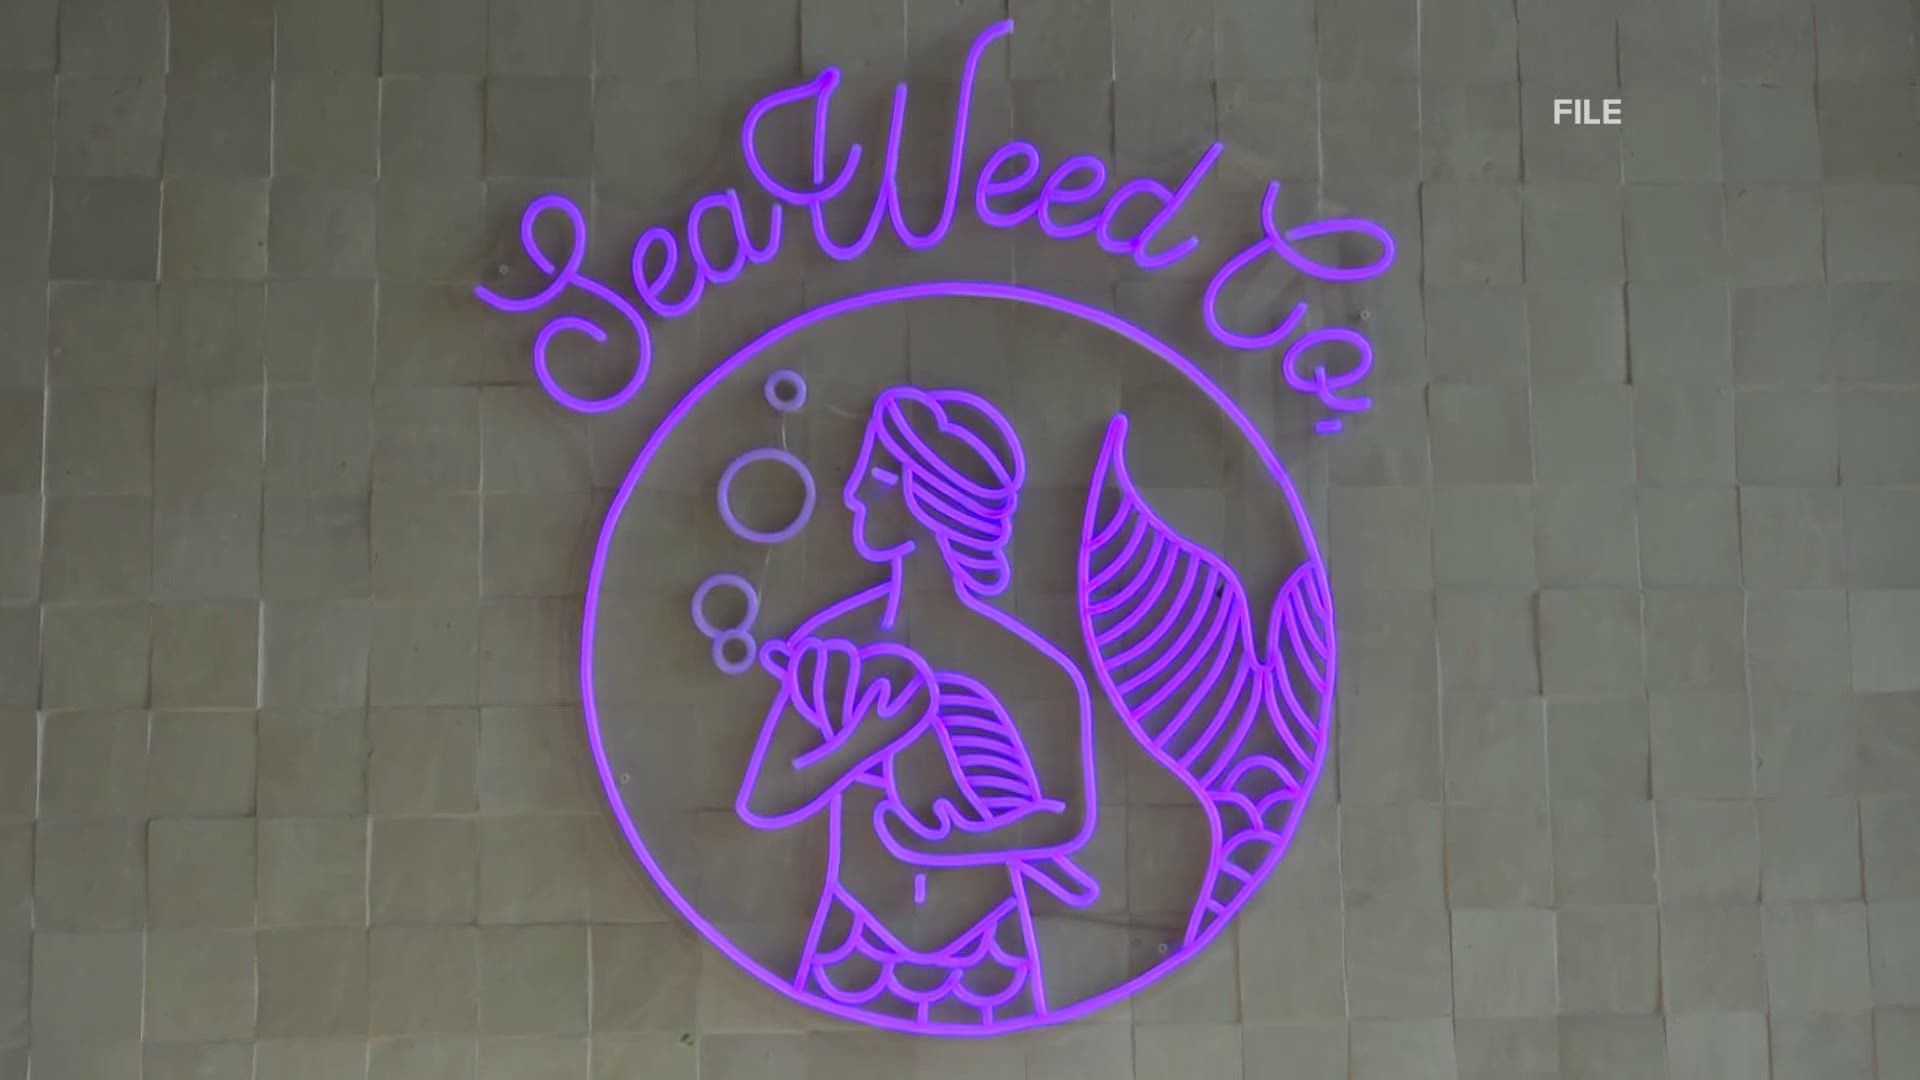 South Portland adult-use cannabis retailer, Seaweed Co. taking legal action against state regulators.' That its logo goes against rules to prevent sales to minors